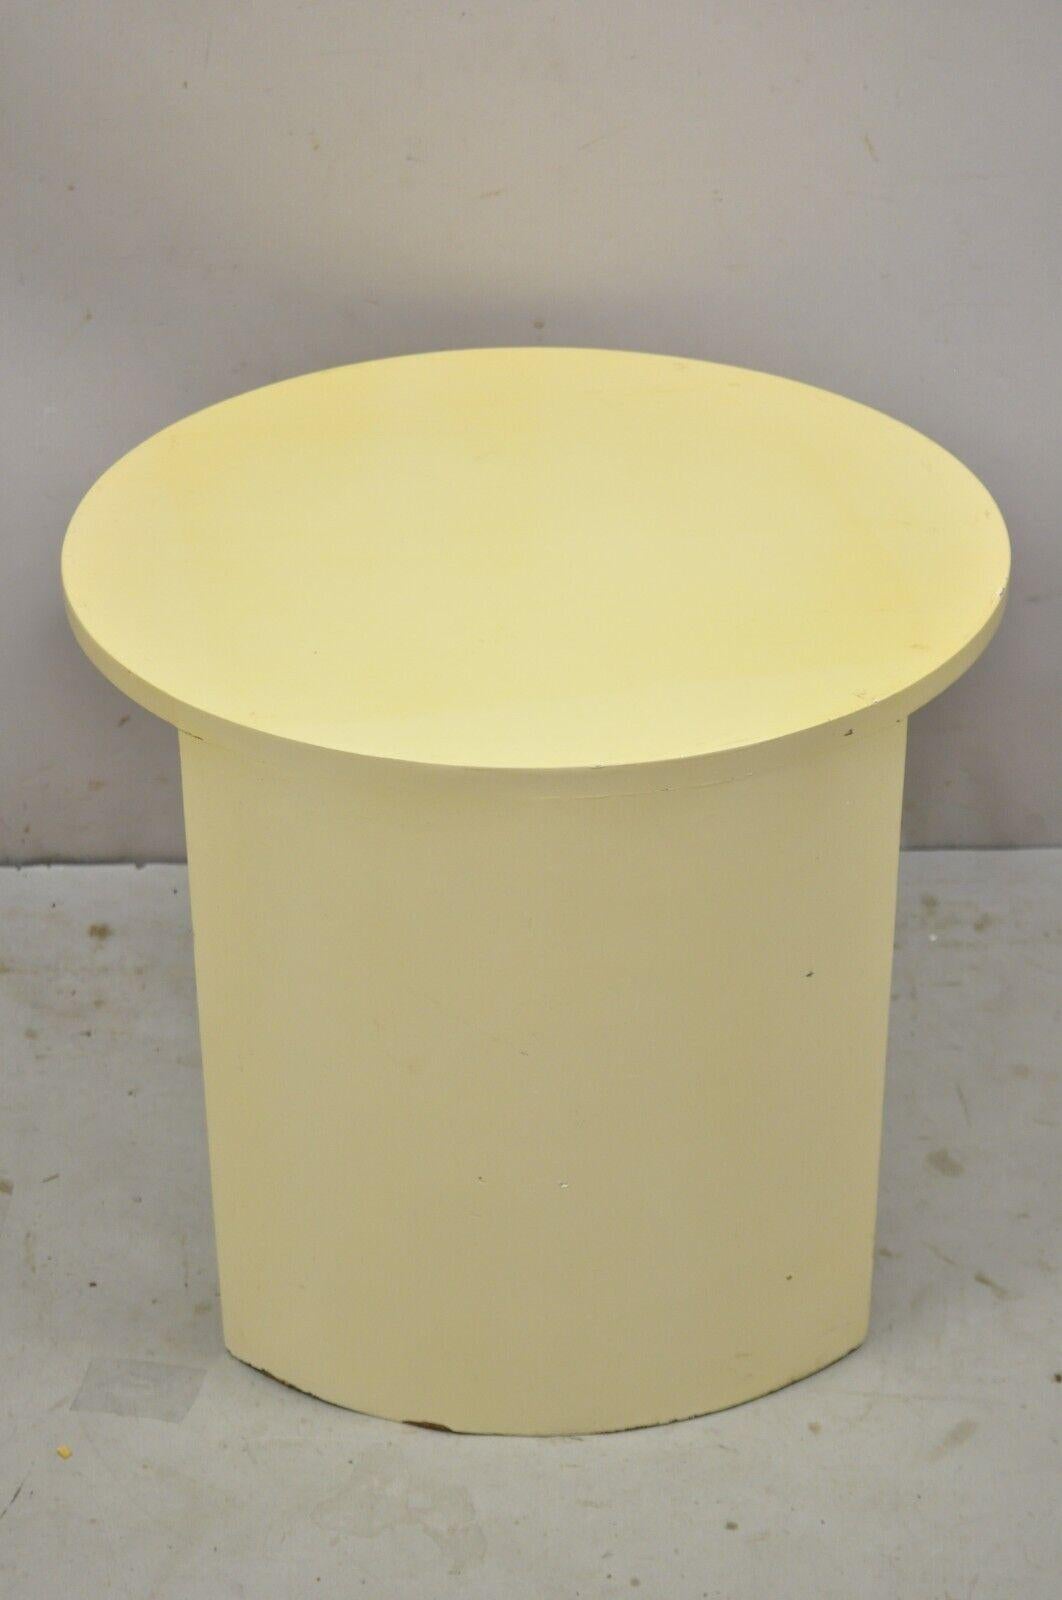 Midcentury Bone Lacquer Round Post Modernist Stretcher Base Accent Side Table In Good Condition For Sale In Philadelphia, PA